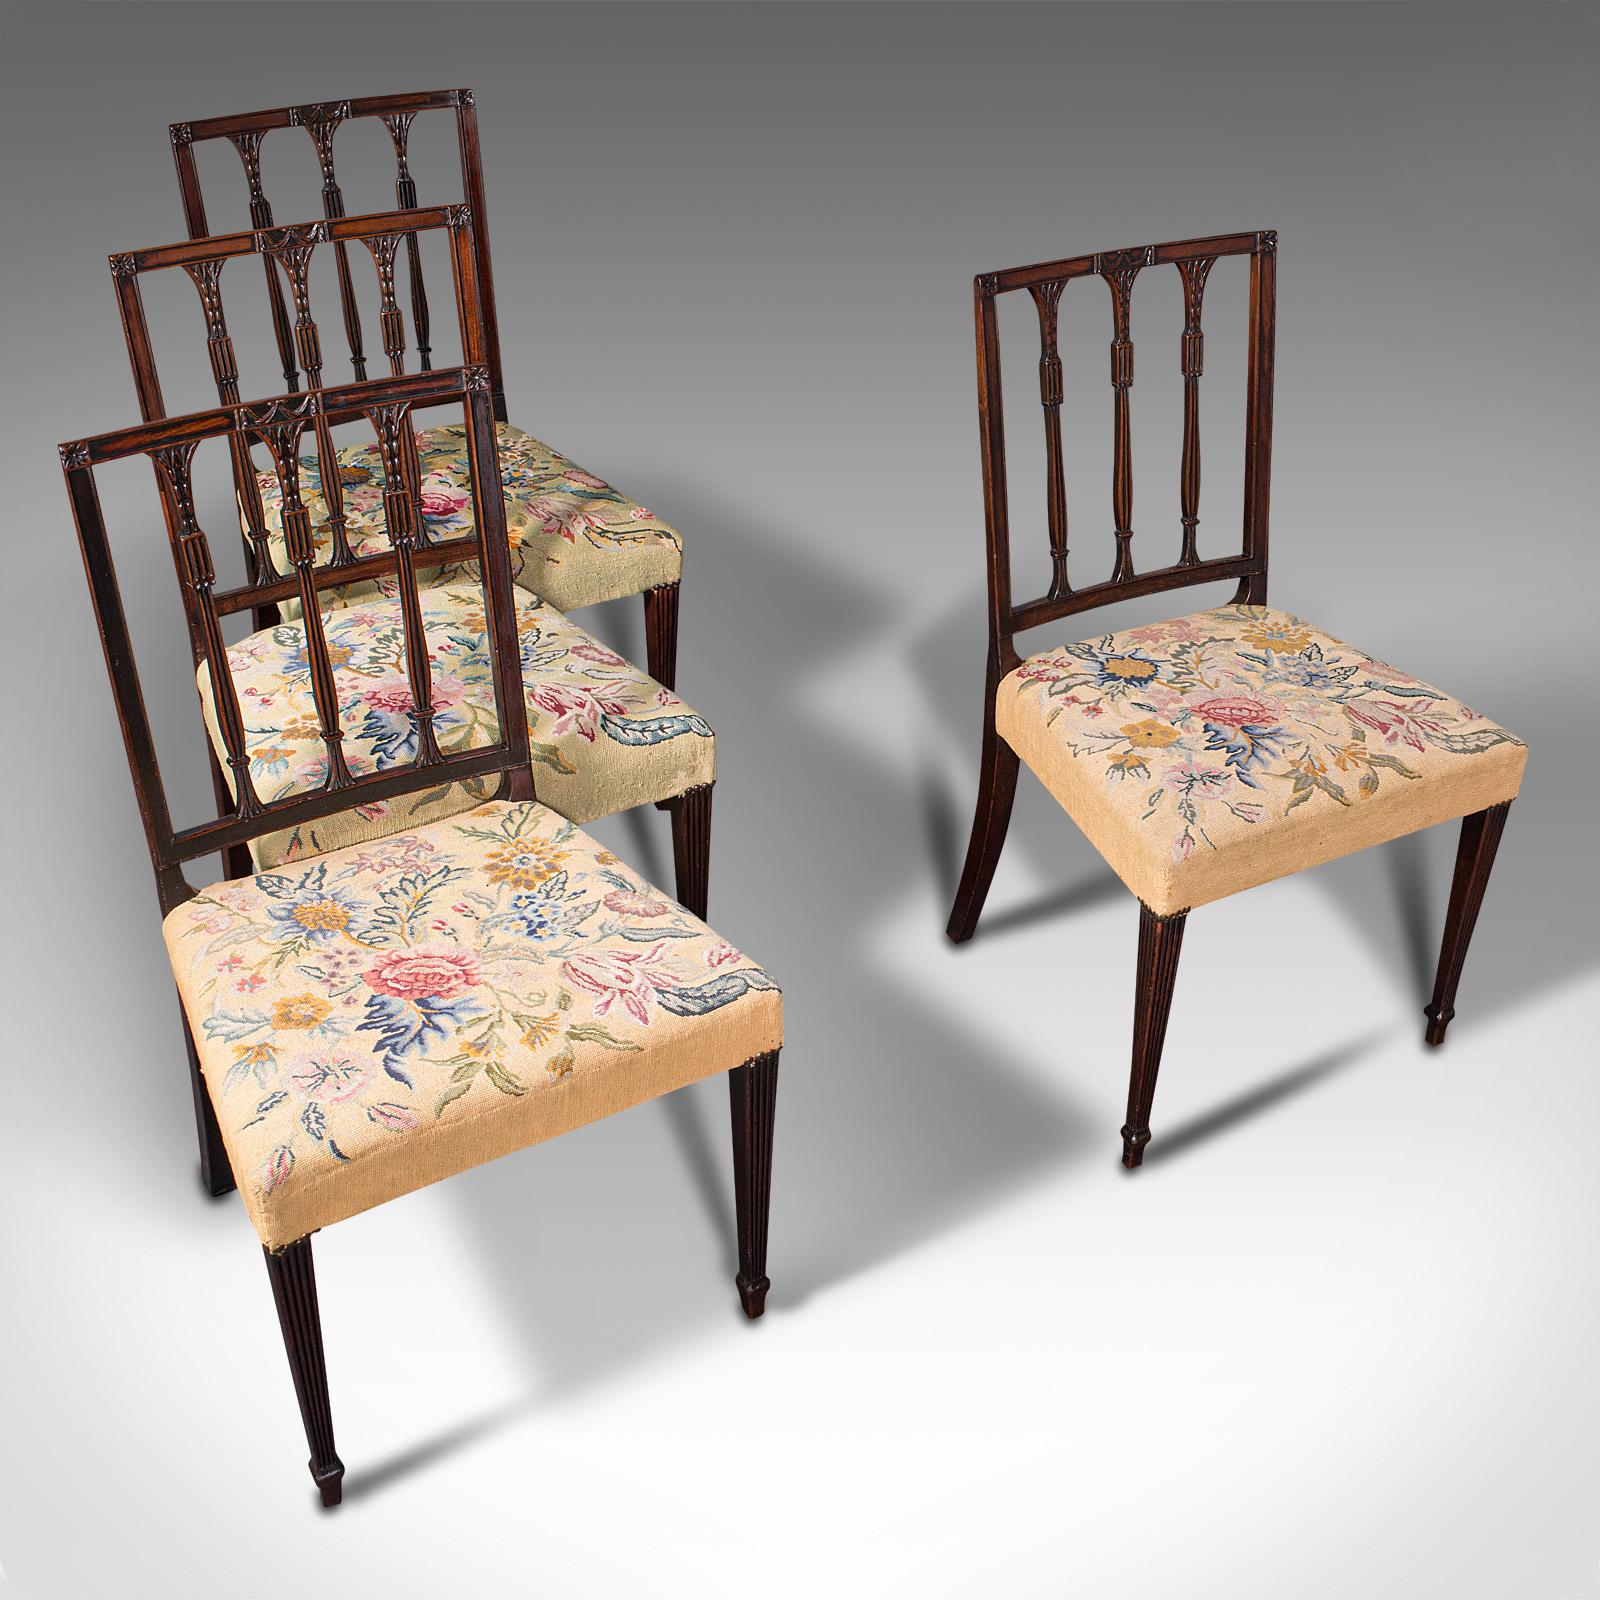 This is a set of 4 antique embroidered chairs. An English, mahogany dining seat in the Sheraton manner, dating to the Georgian period, circa 1780.

Delightful embroidered cushions and superb Georgian craftsmanship
Displaying a desirable aged